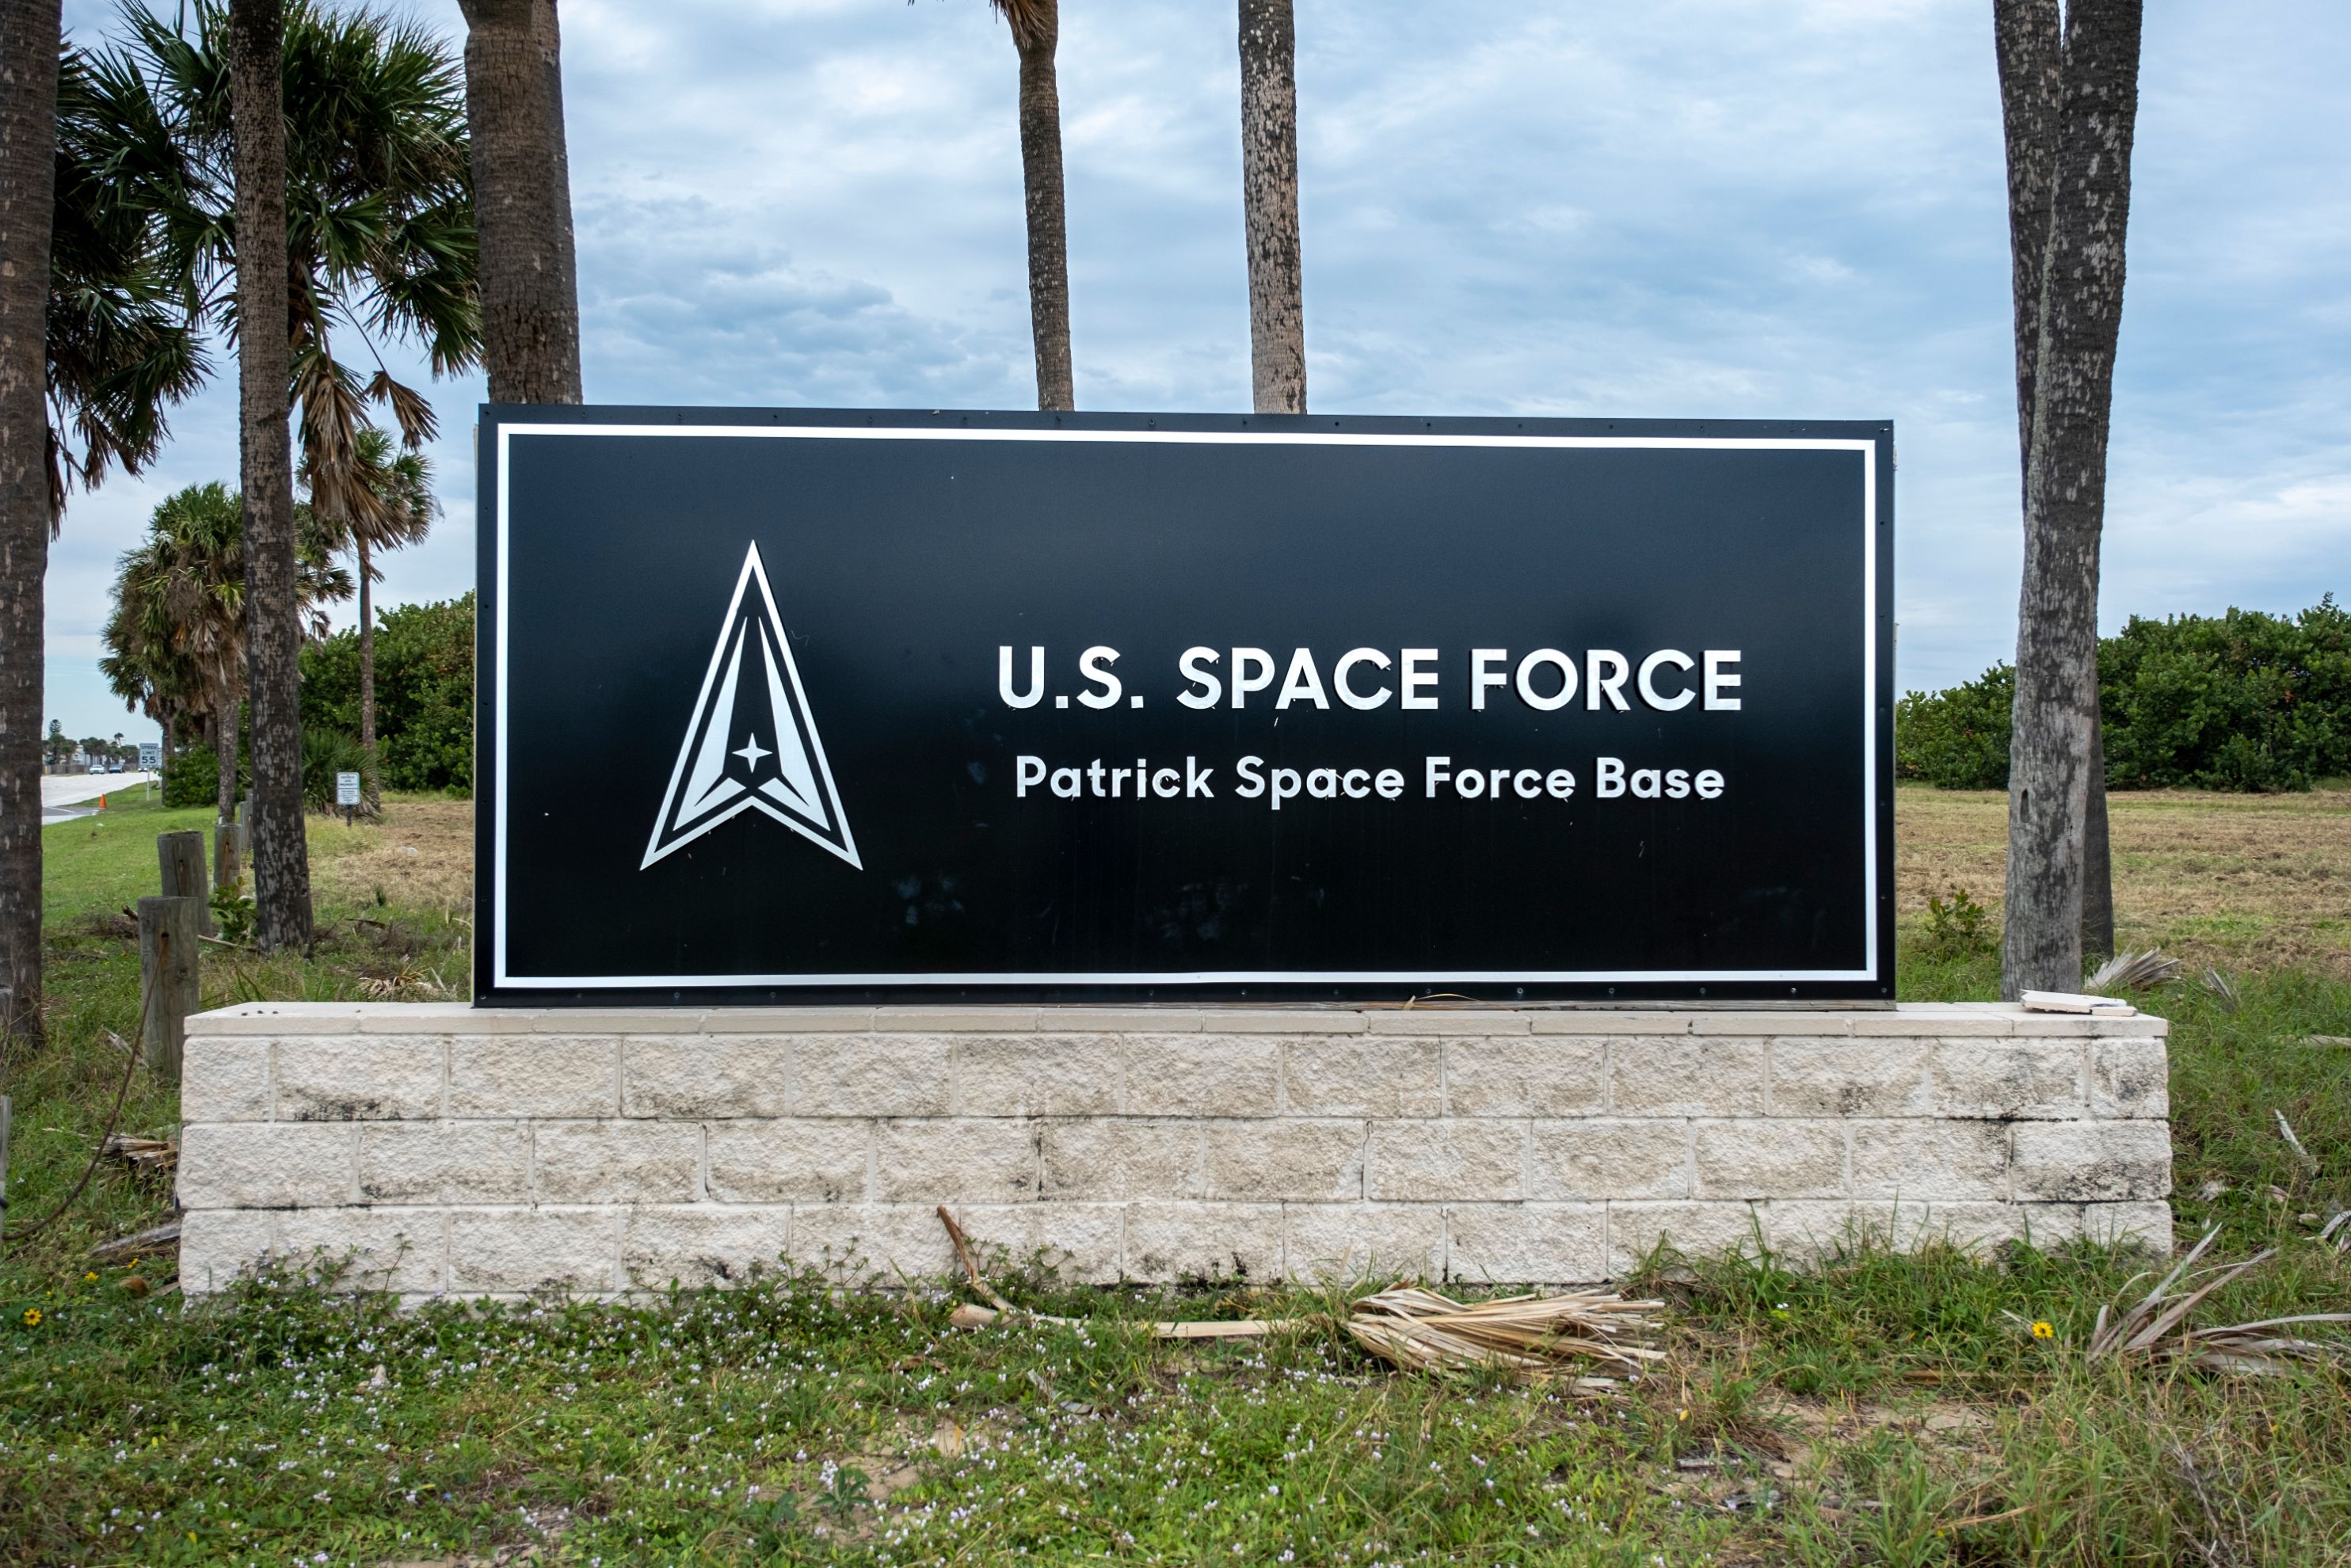 Brevard County, Florida, USA- October 19, 2022: U.S. Space Force sign for the Patrick Space Force Base